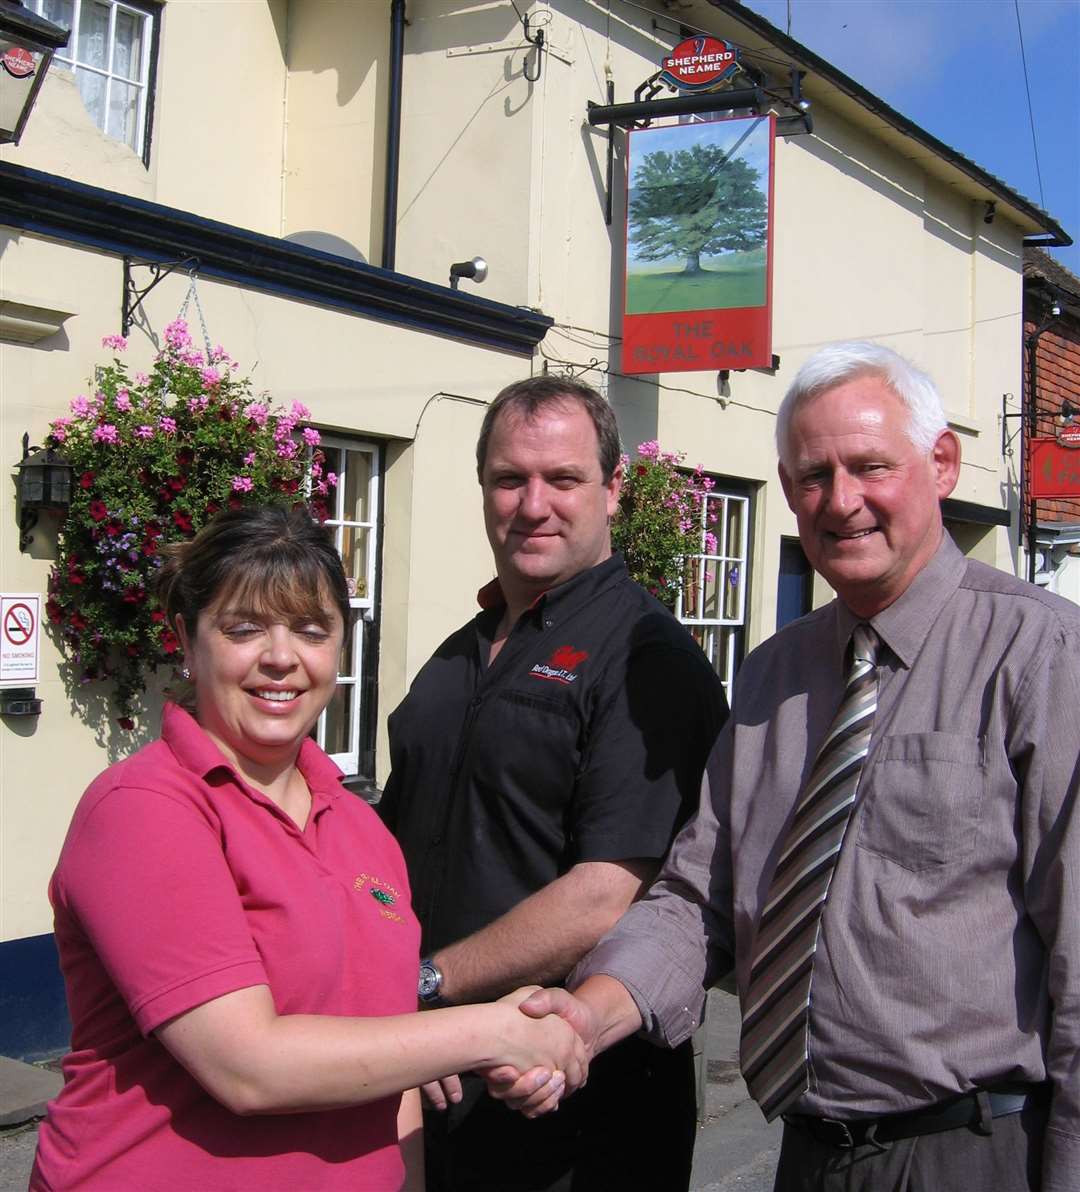 In 2007, Michelle Barden, landlady of The Royal Oak, became the first user of www.pubmenus.co.uk, an online pub meal pre-ordering system. She's pictured with Keith Sutton, right, director of SDA Marketing, and Gareth Hurford-Jones, of Red Dragon IT, designers of the system